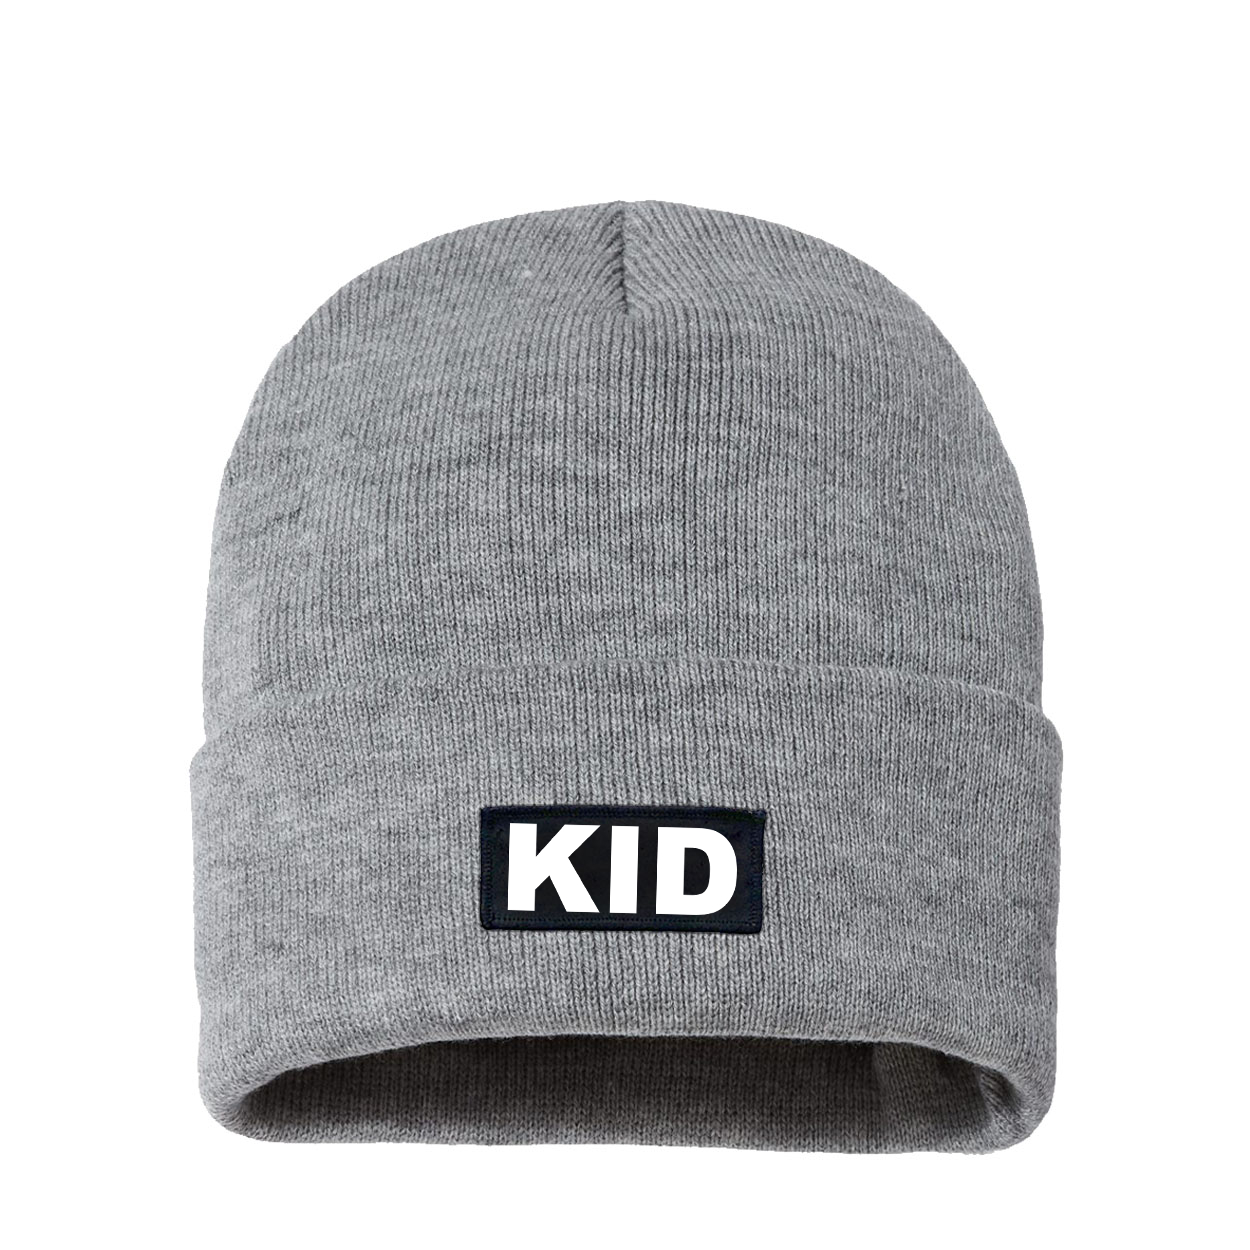 Kid Brand Logo Night Out Woven Patch Sherpa Lined Cuffed Beanie Heather Gray